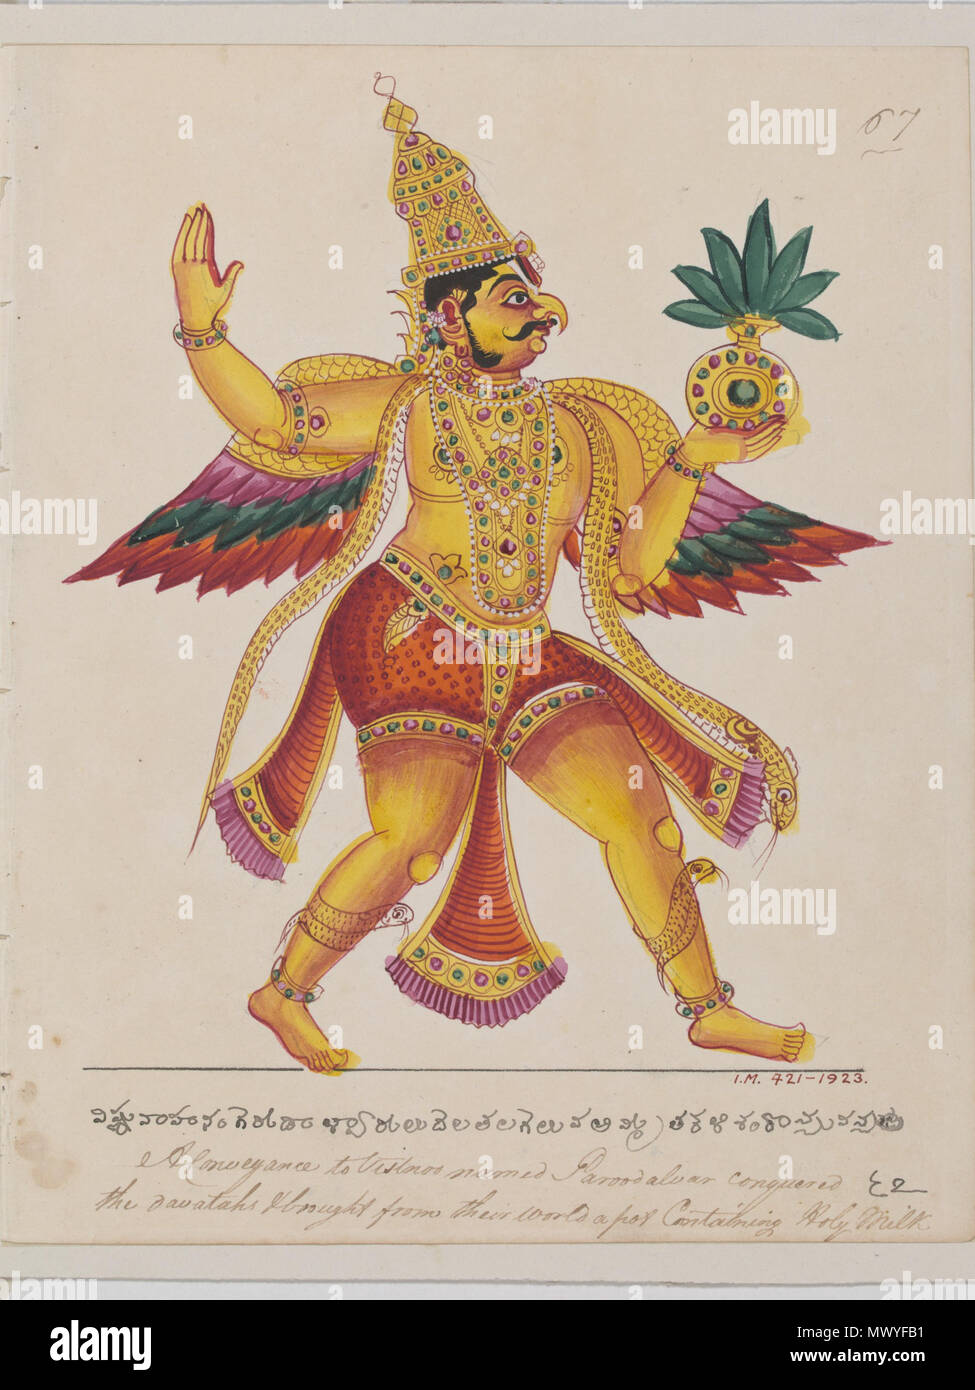 English Garuda The Vahana Of Vishnu Returning With The Vase Of Amrita Which He Had Stolen From The Gods In Order To Free His Mother From Kadru Mother Of Serpents The